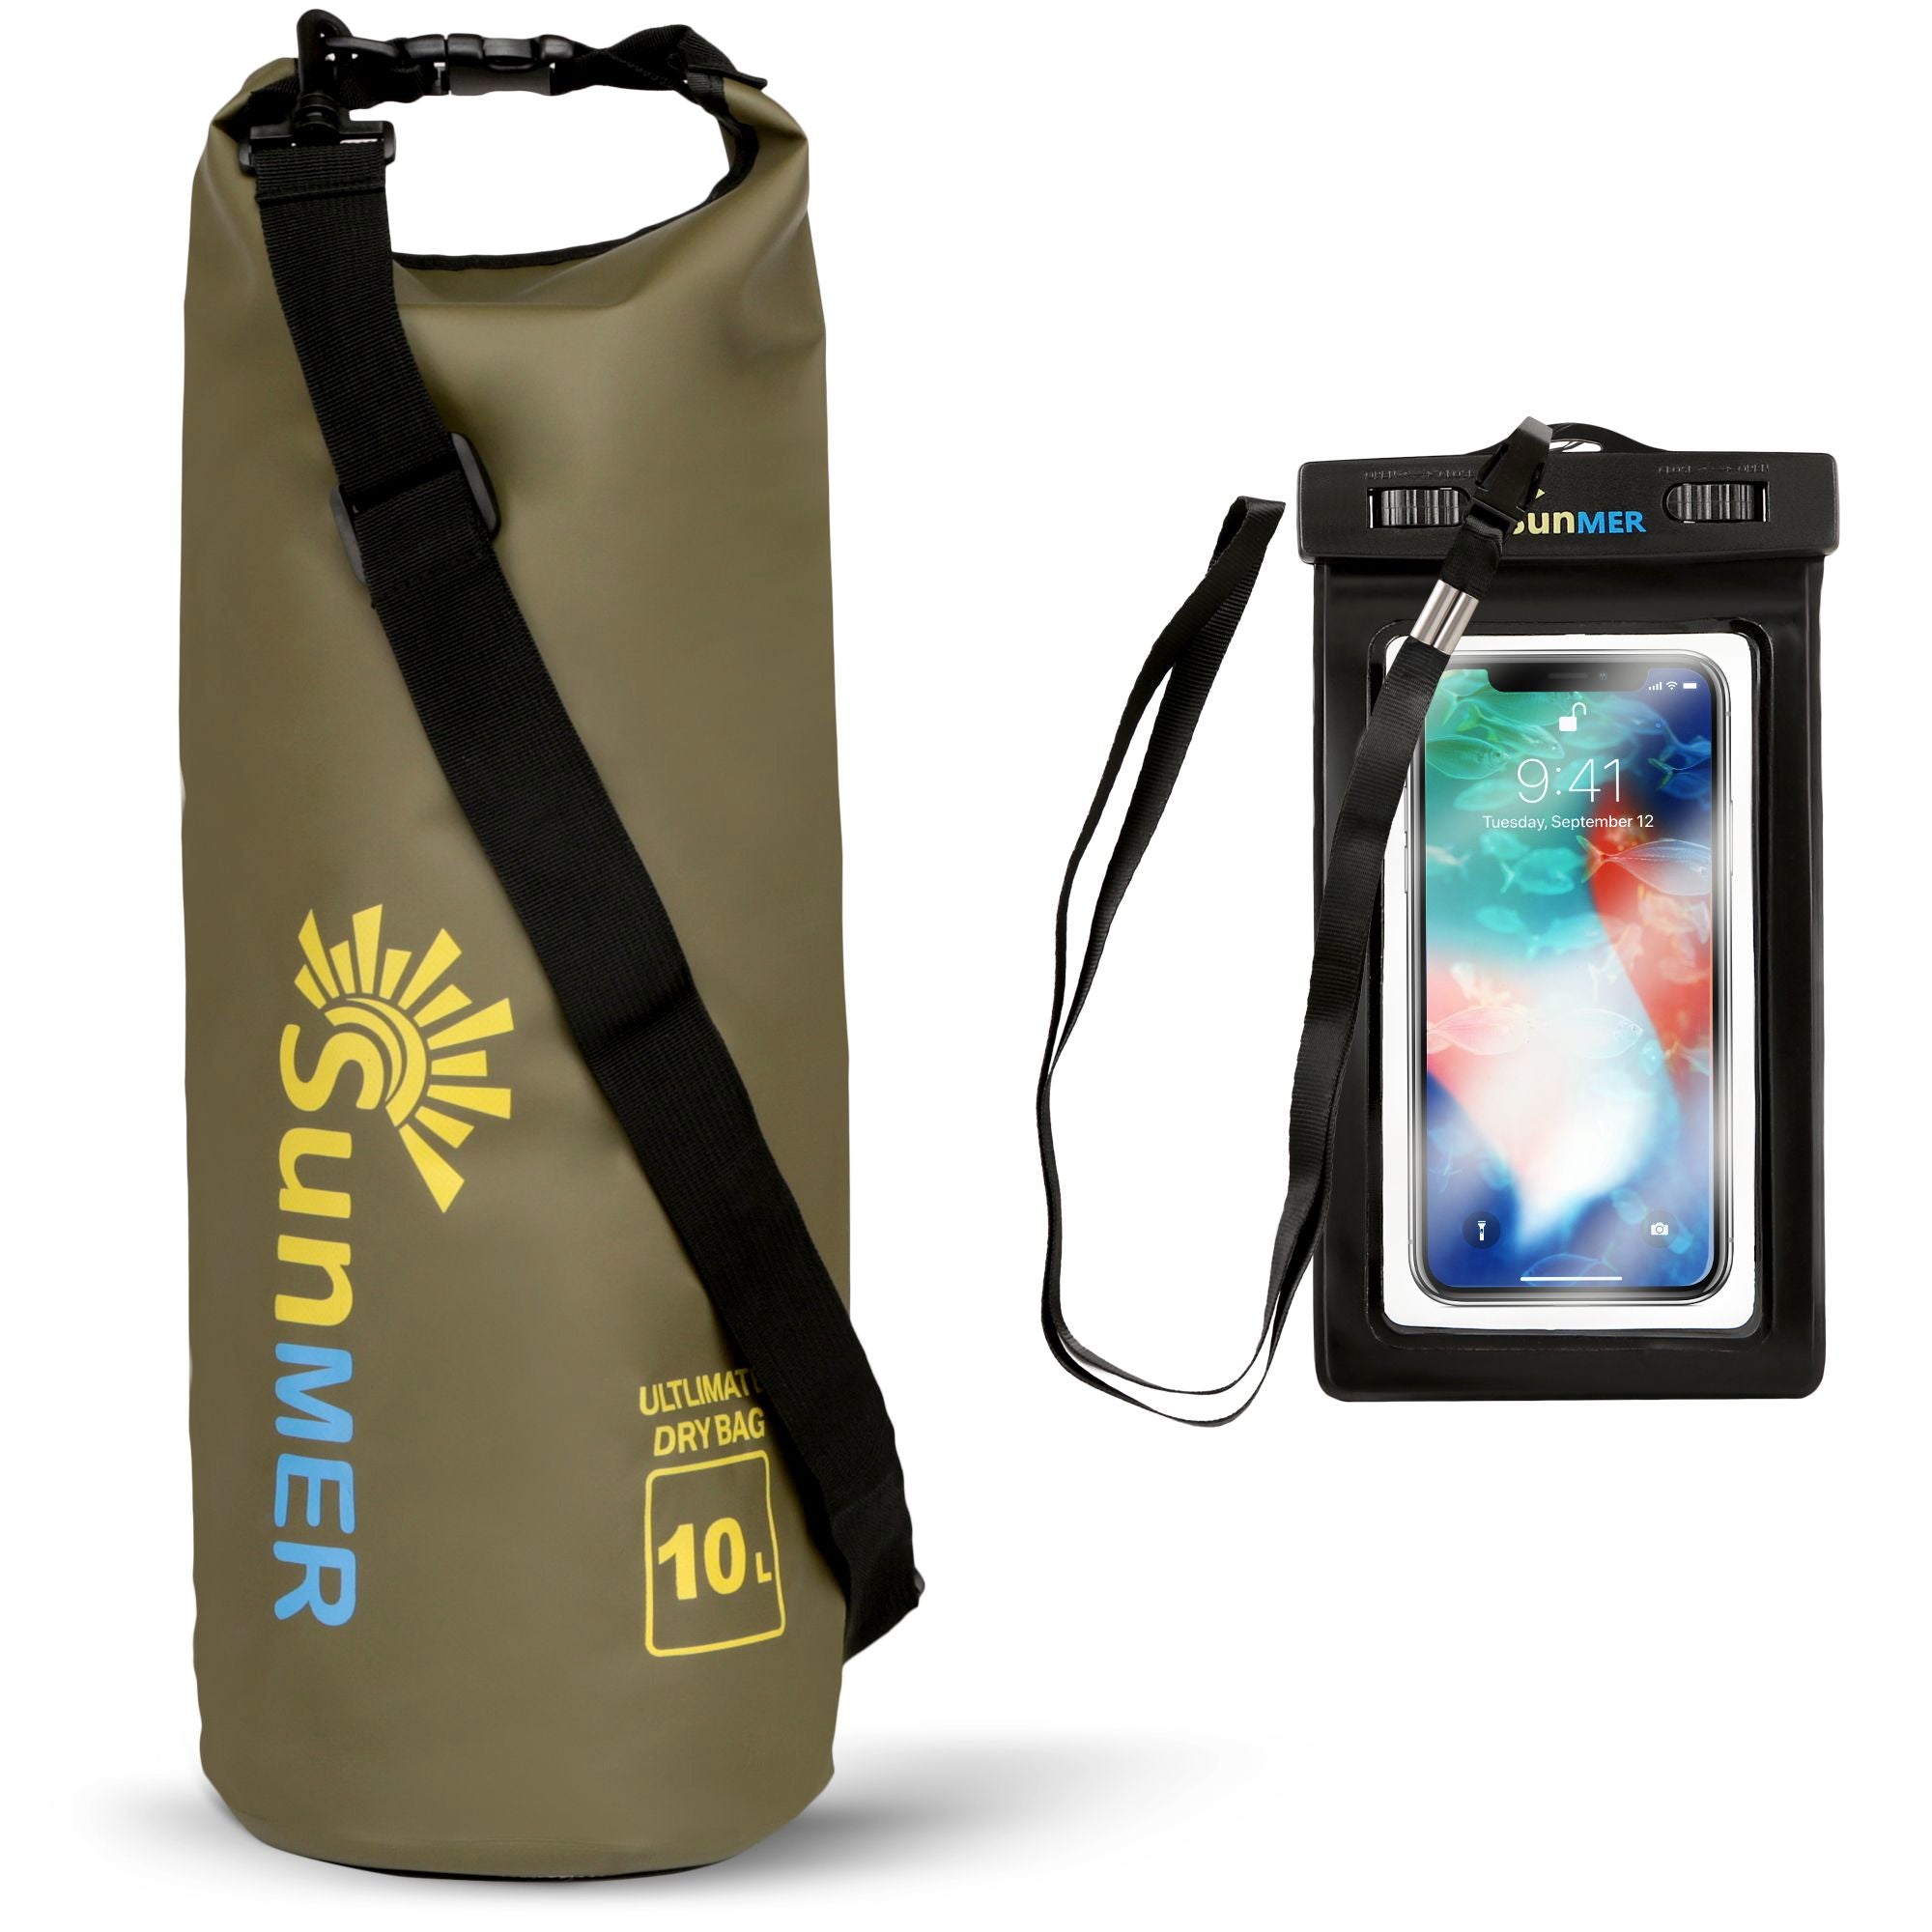 SUNMER 10L Dry Bag With Waterproof Phone Case - Army Green